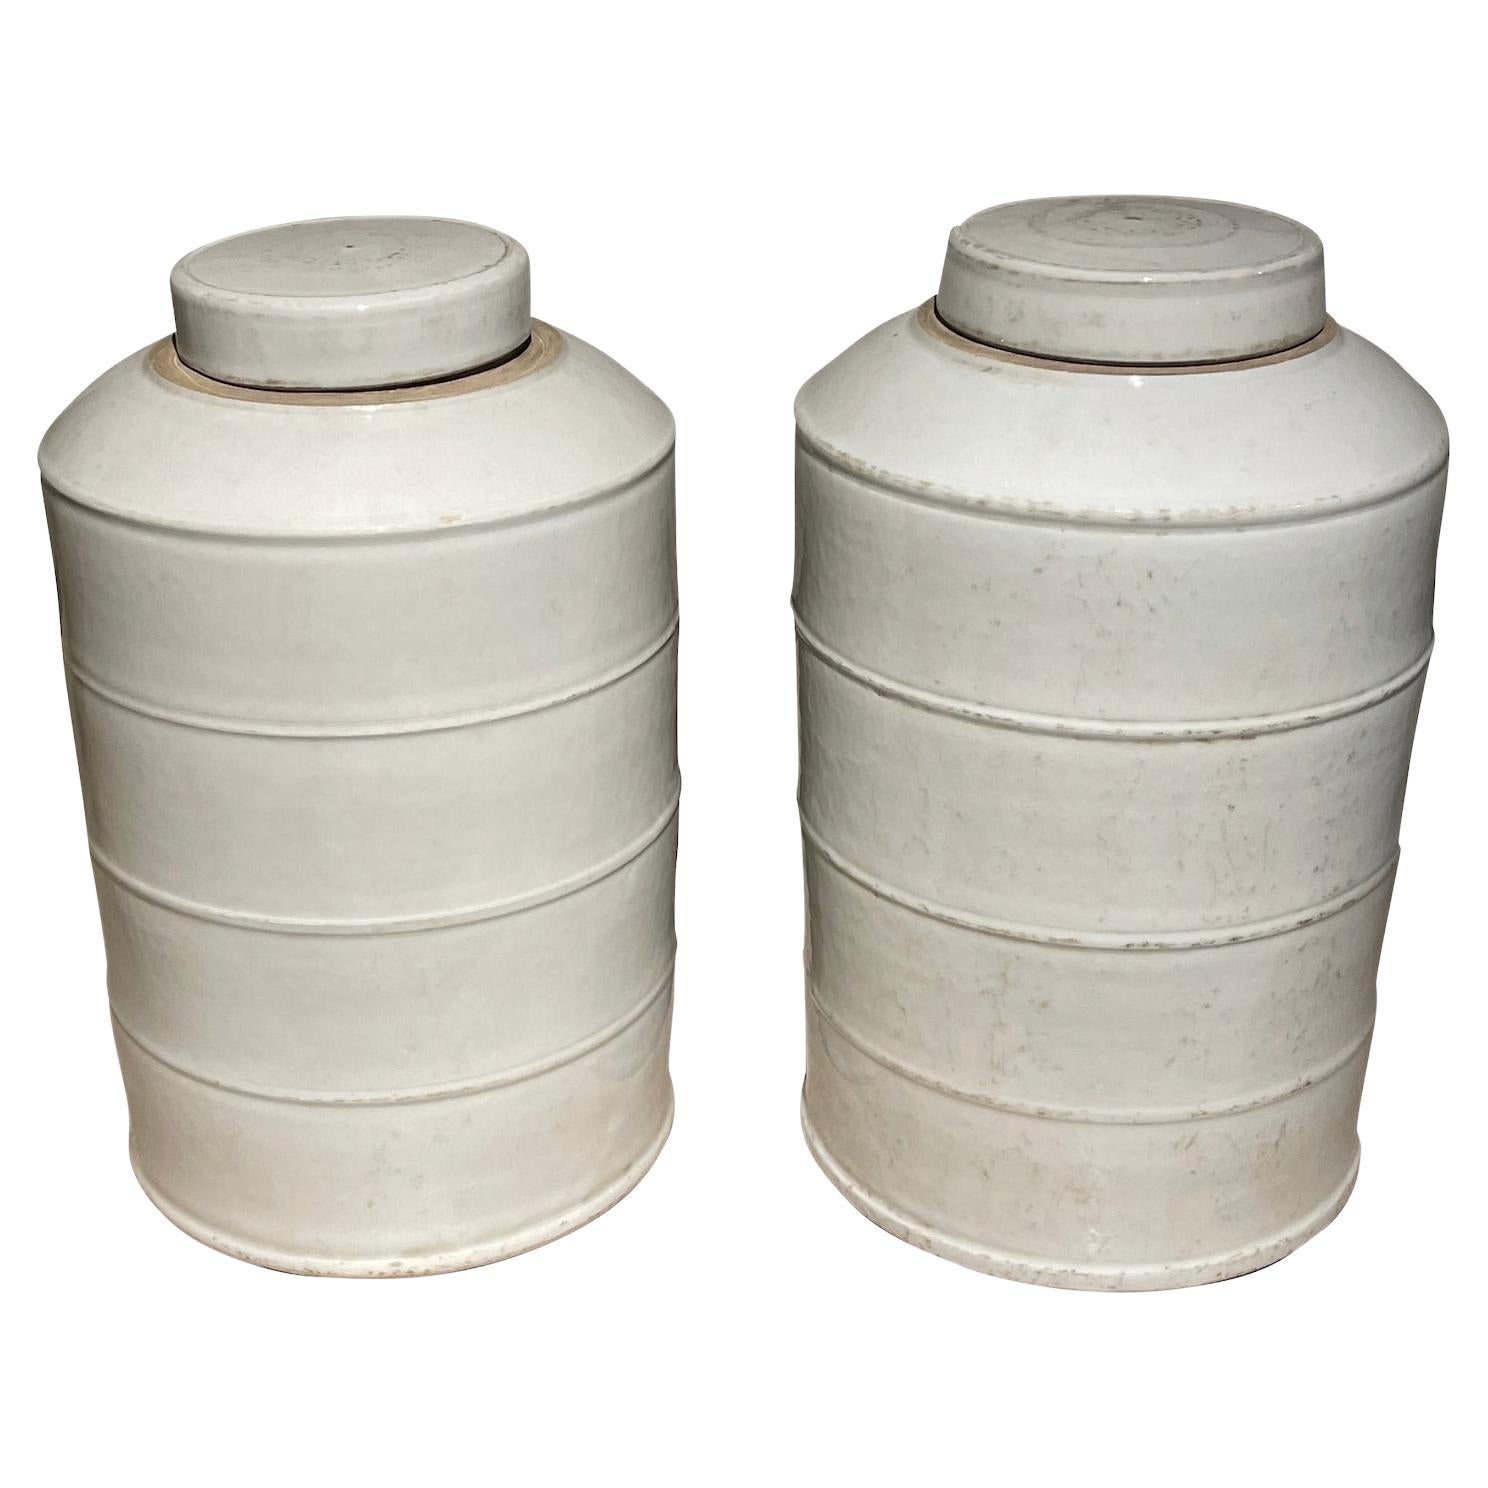 White Lidded Pair of Canisters, China, Contemporary